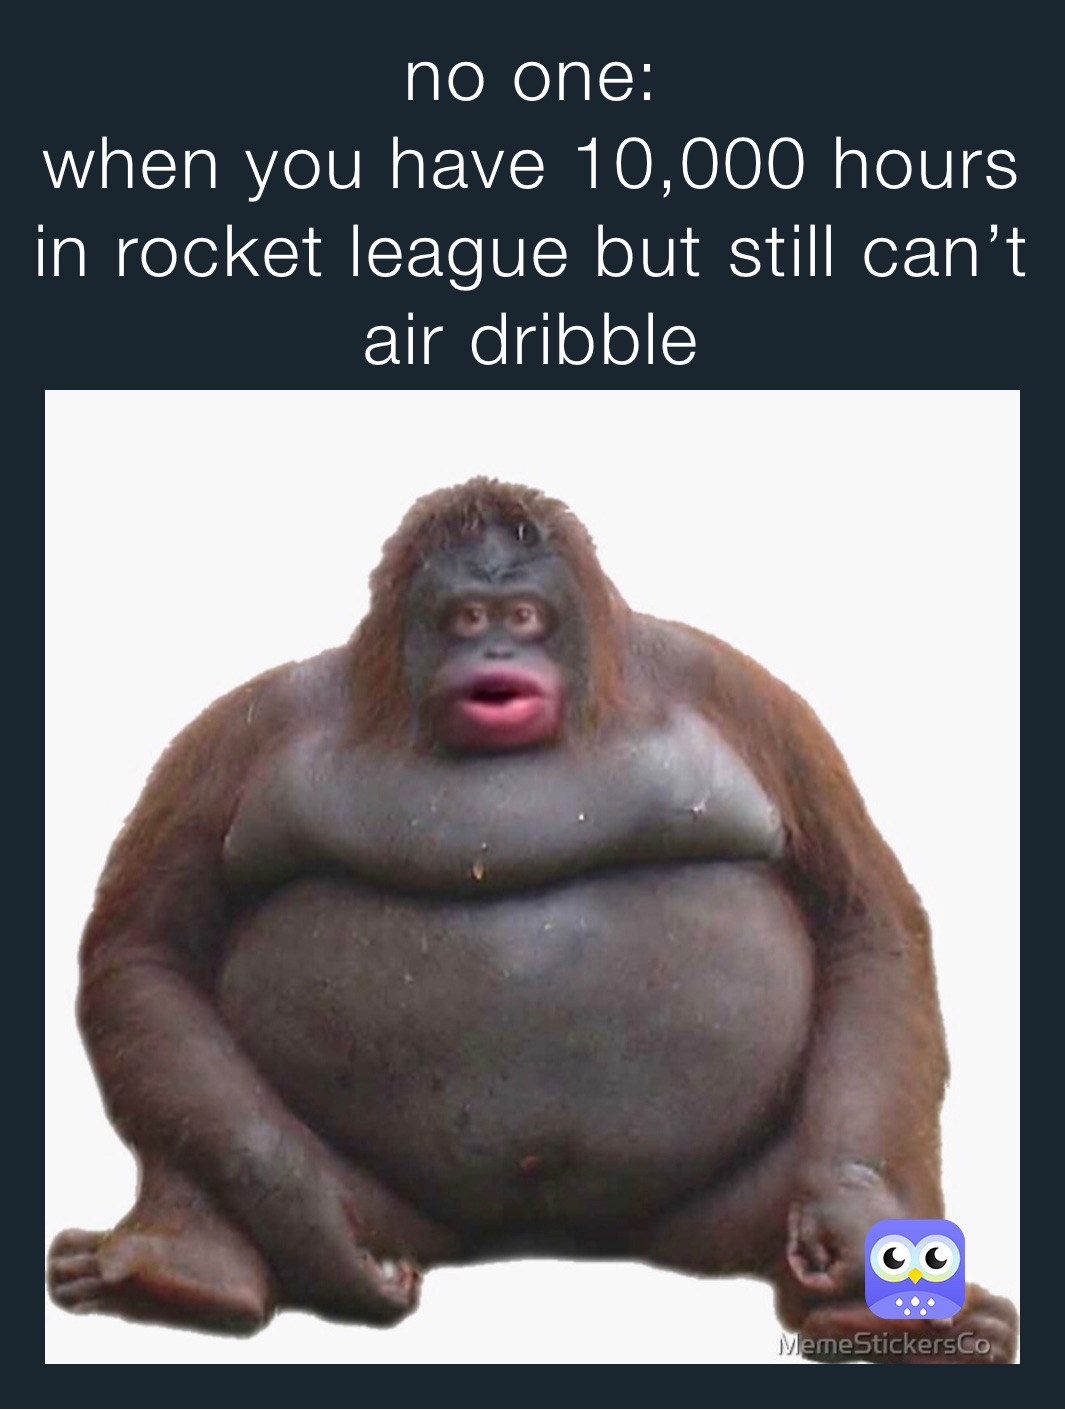 no one: 
when you have 10,000 hours in rocket league but still can’t air dribble